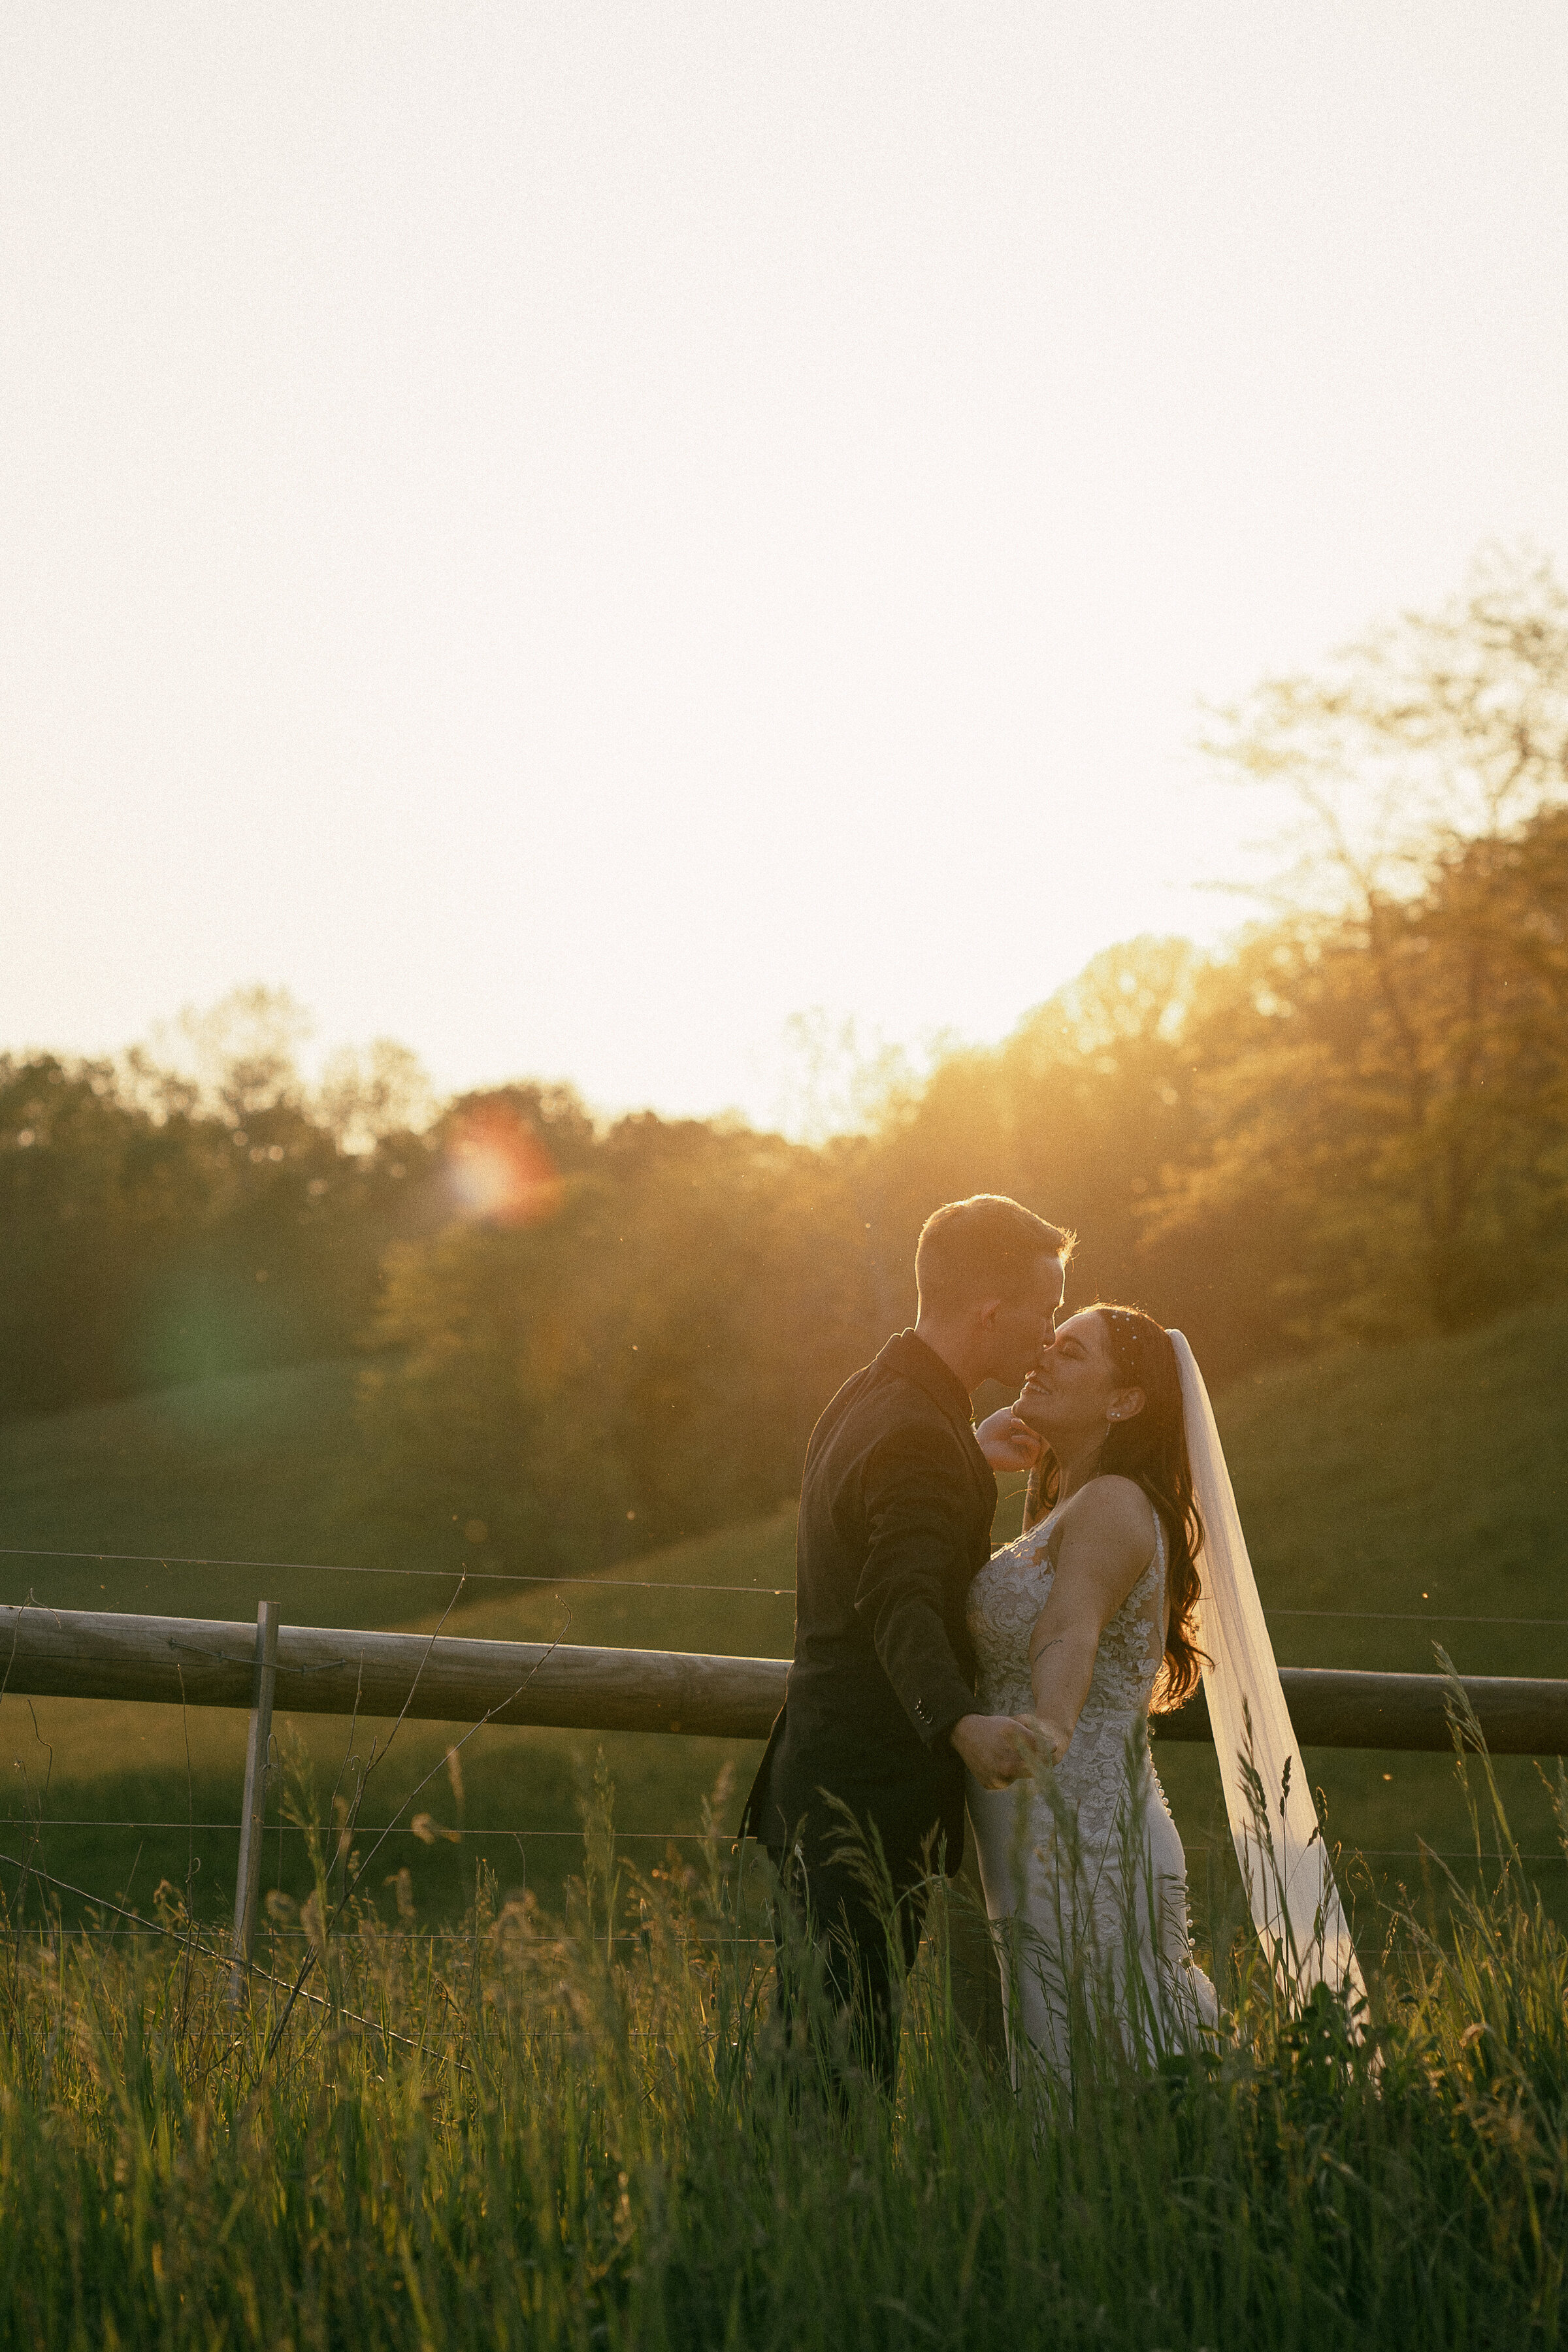 Bride and groom kissing in a field at sunset with a warm backlight.